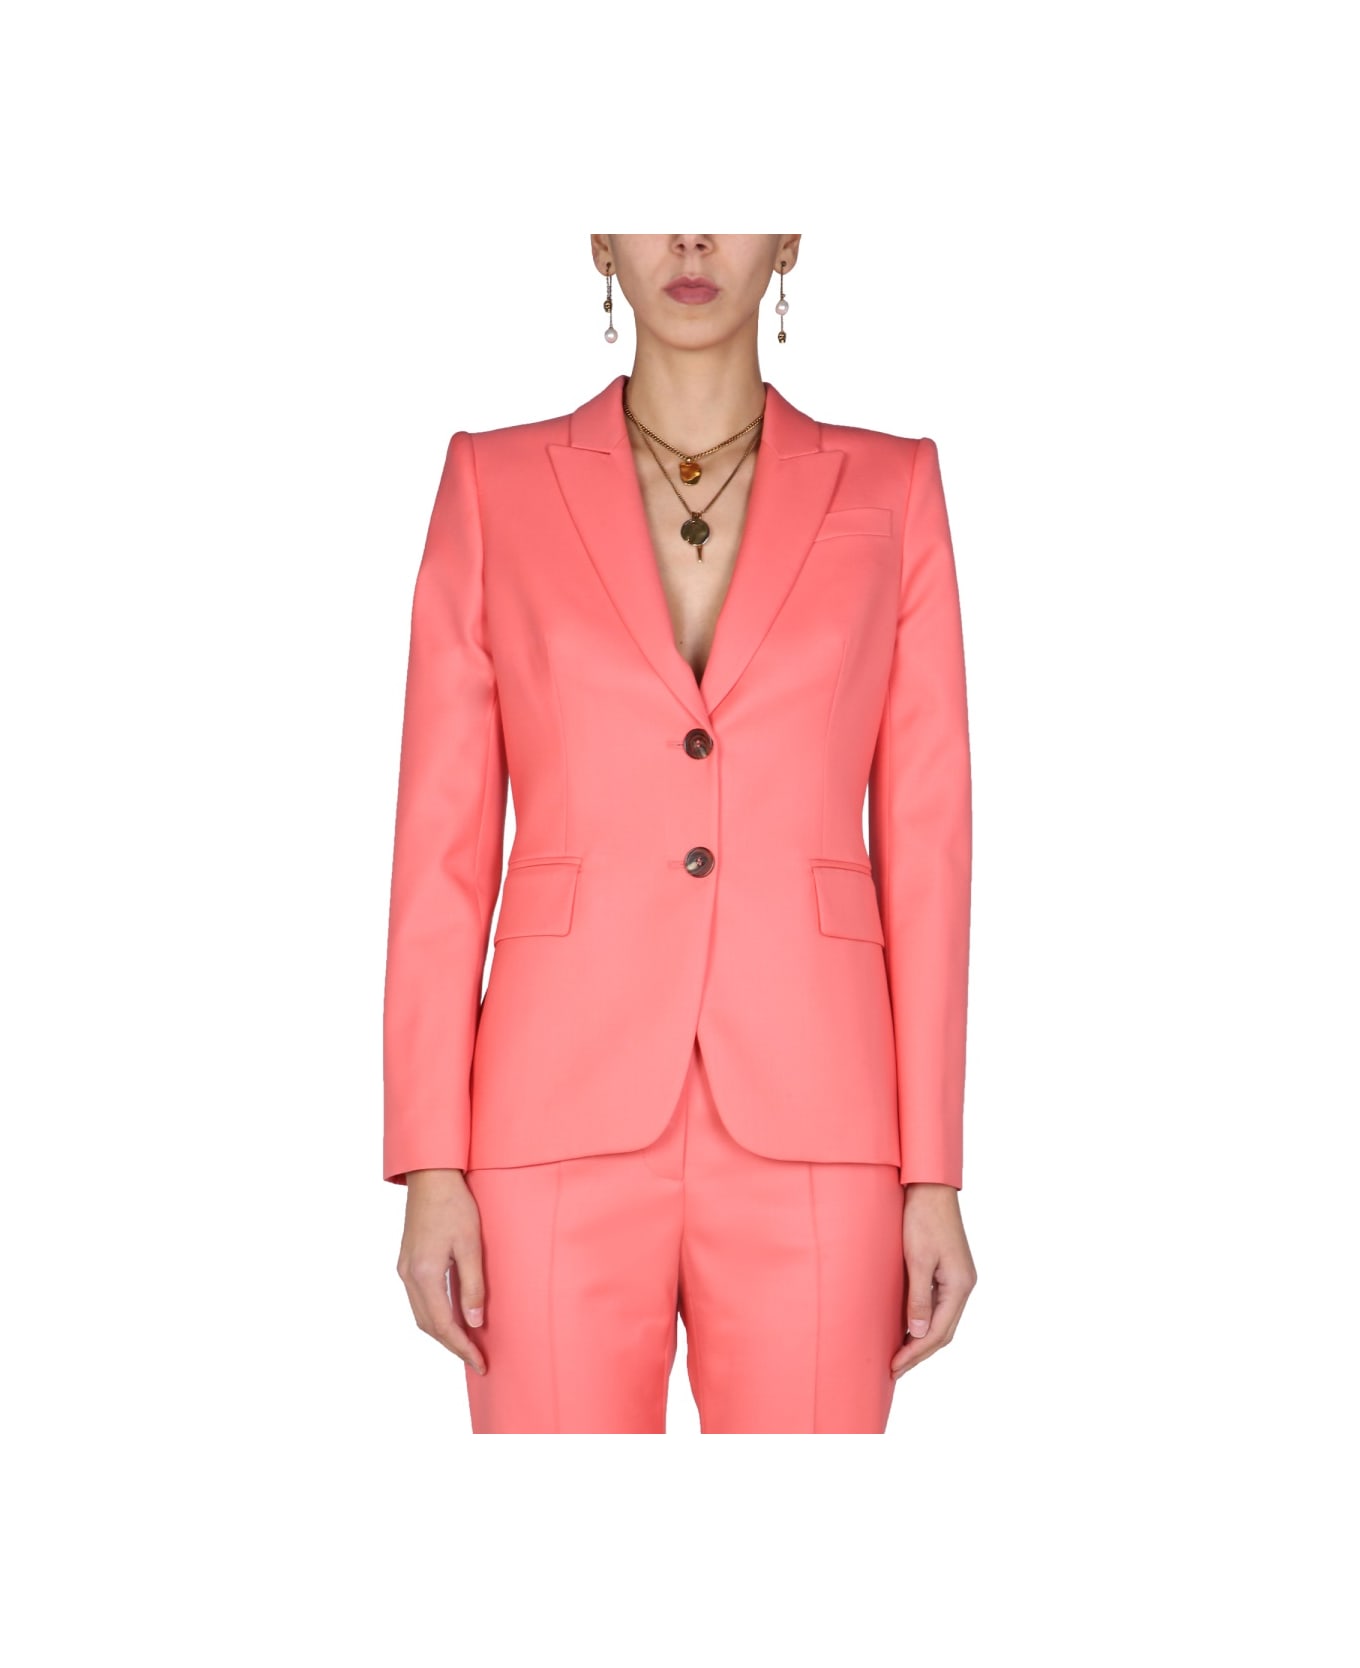 Alexander McQueen Jacket With Two Buttons - PINK ジャケット